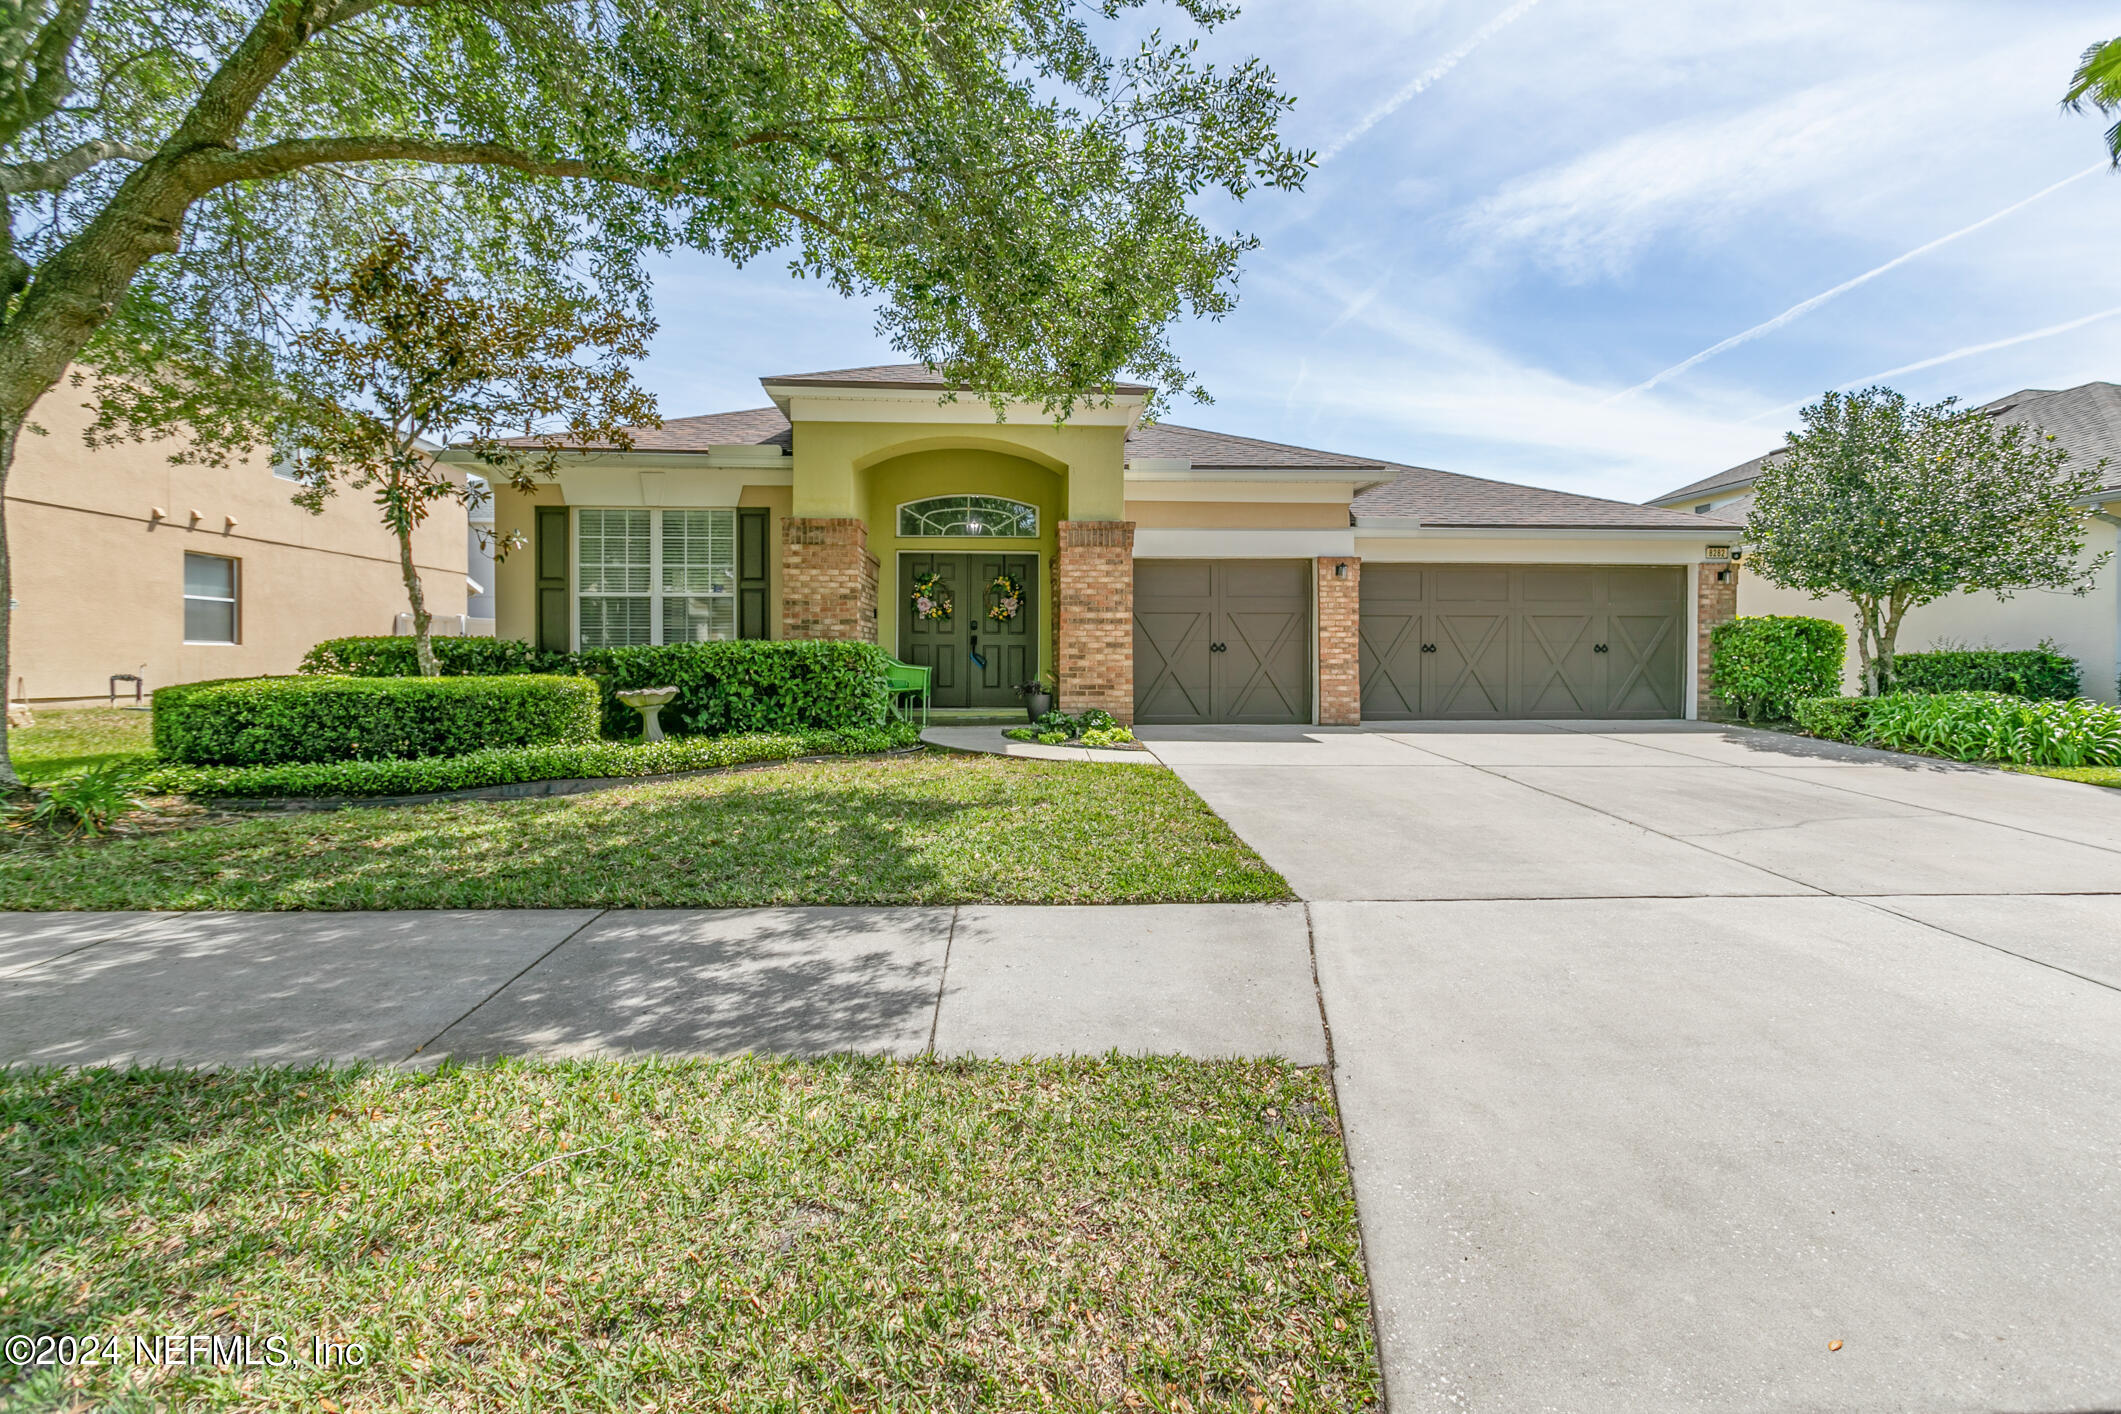 Jacksonville, FL home for sale located at 8282 Hedgewood Drive, Jacksonville, FL 32216